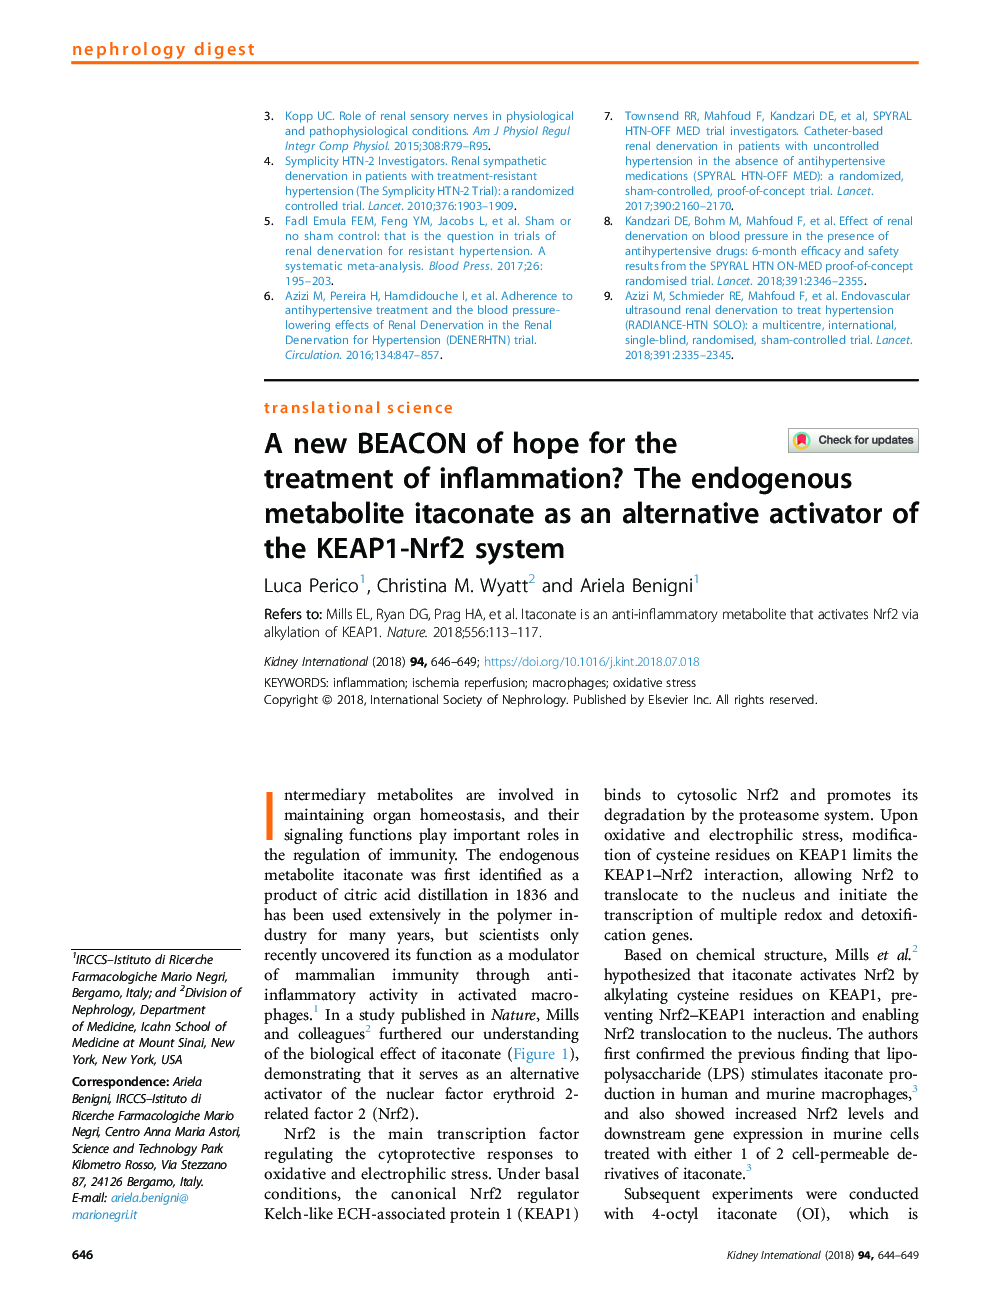 A new BEACON of hope for the treatment of inflammation? The endogenous metabolite itaconate as an alternative activator of the KEAP1-Nrf2 system